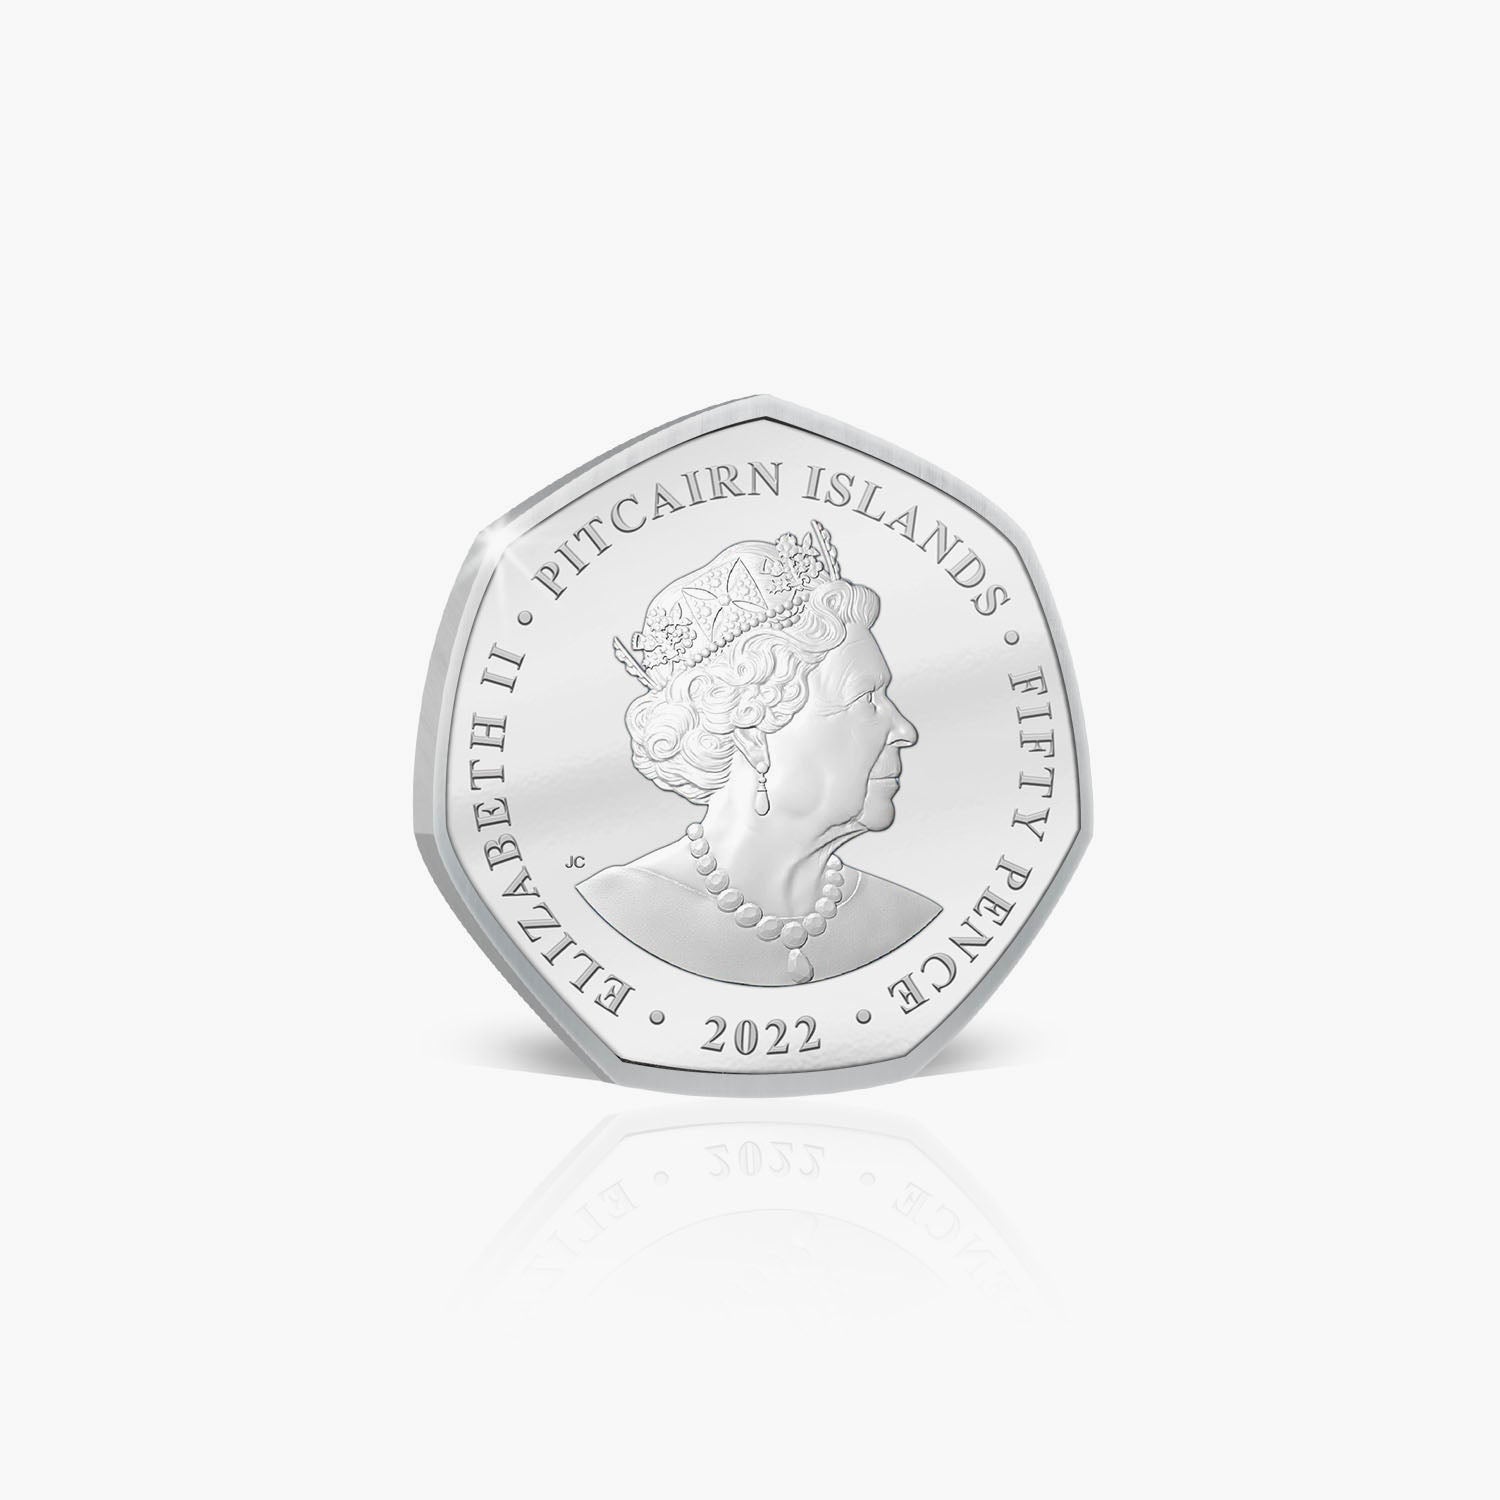 The Official Elf on the Shelf Silver Proof 50p Coin